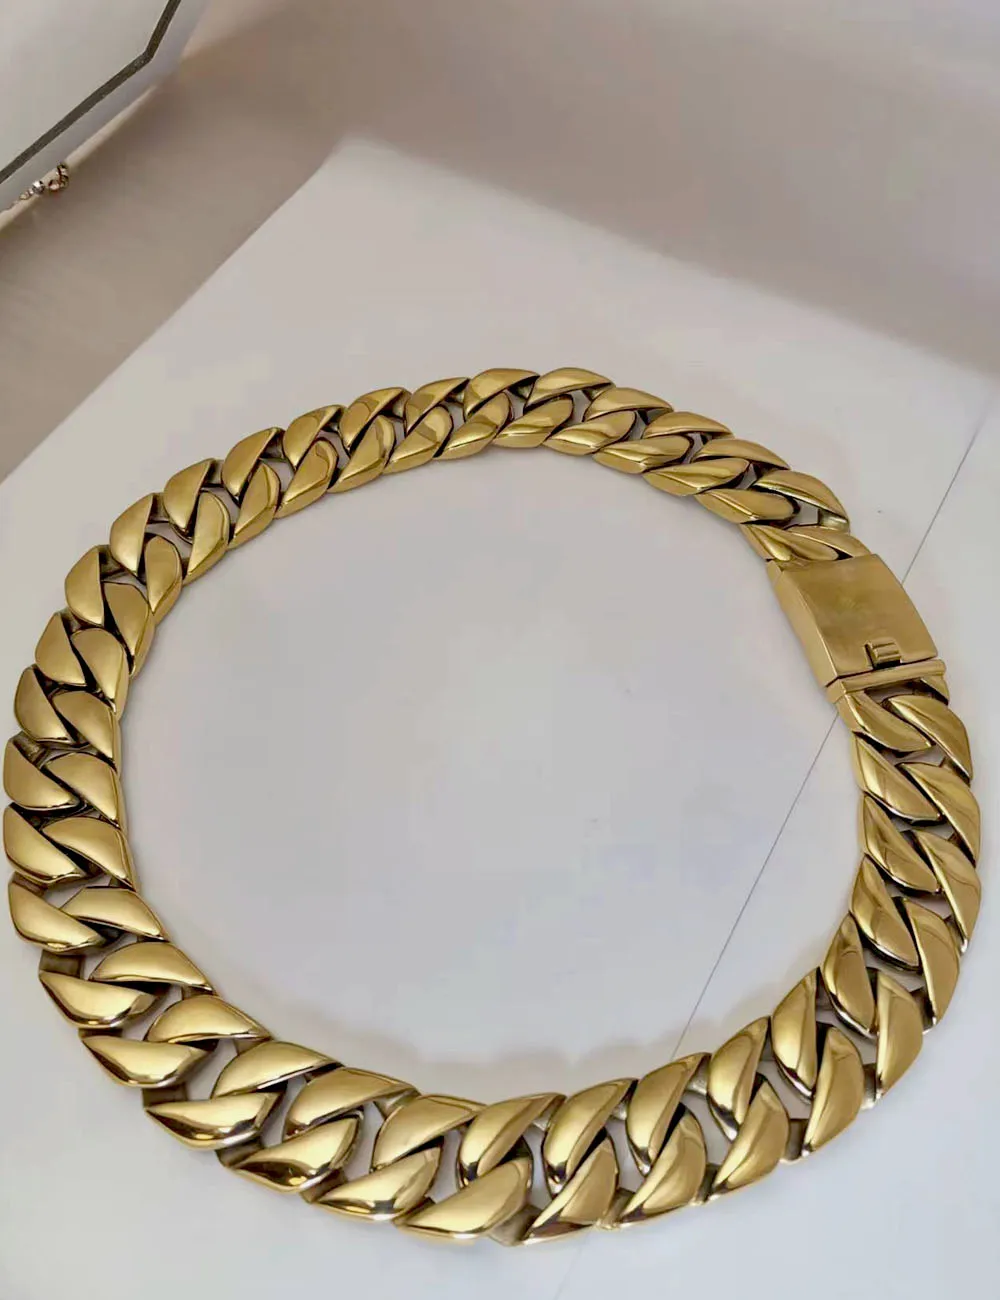 

wholesale 26/32mm width big thick Cuban link chain bracelets necklaces for women and men Silver gold color jewelry